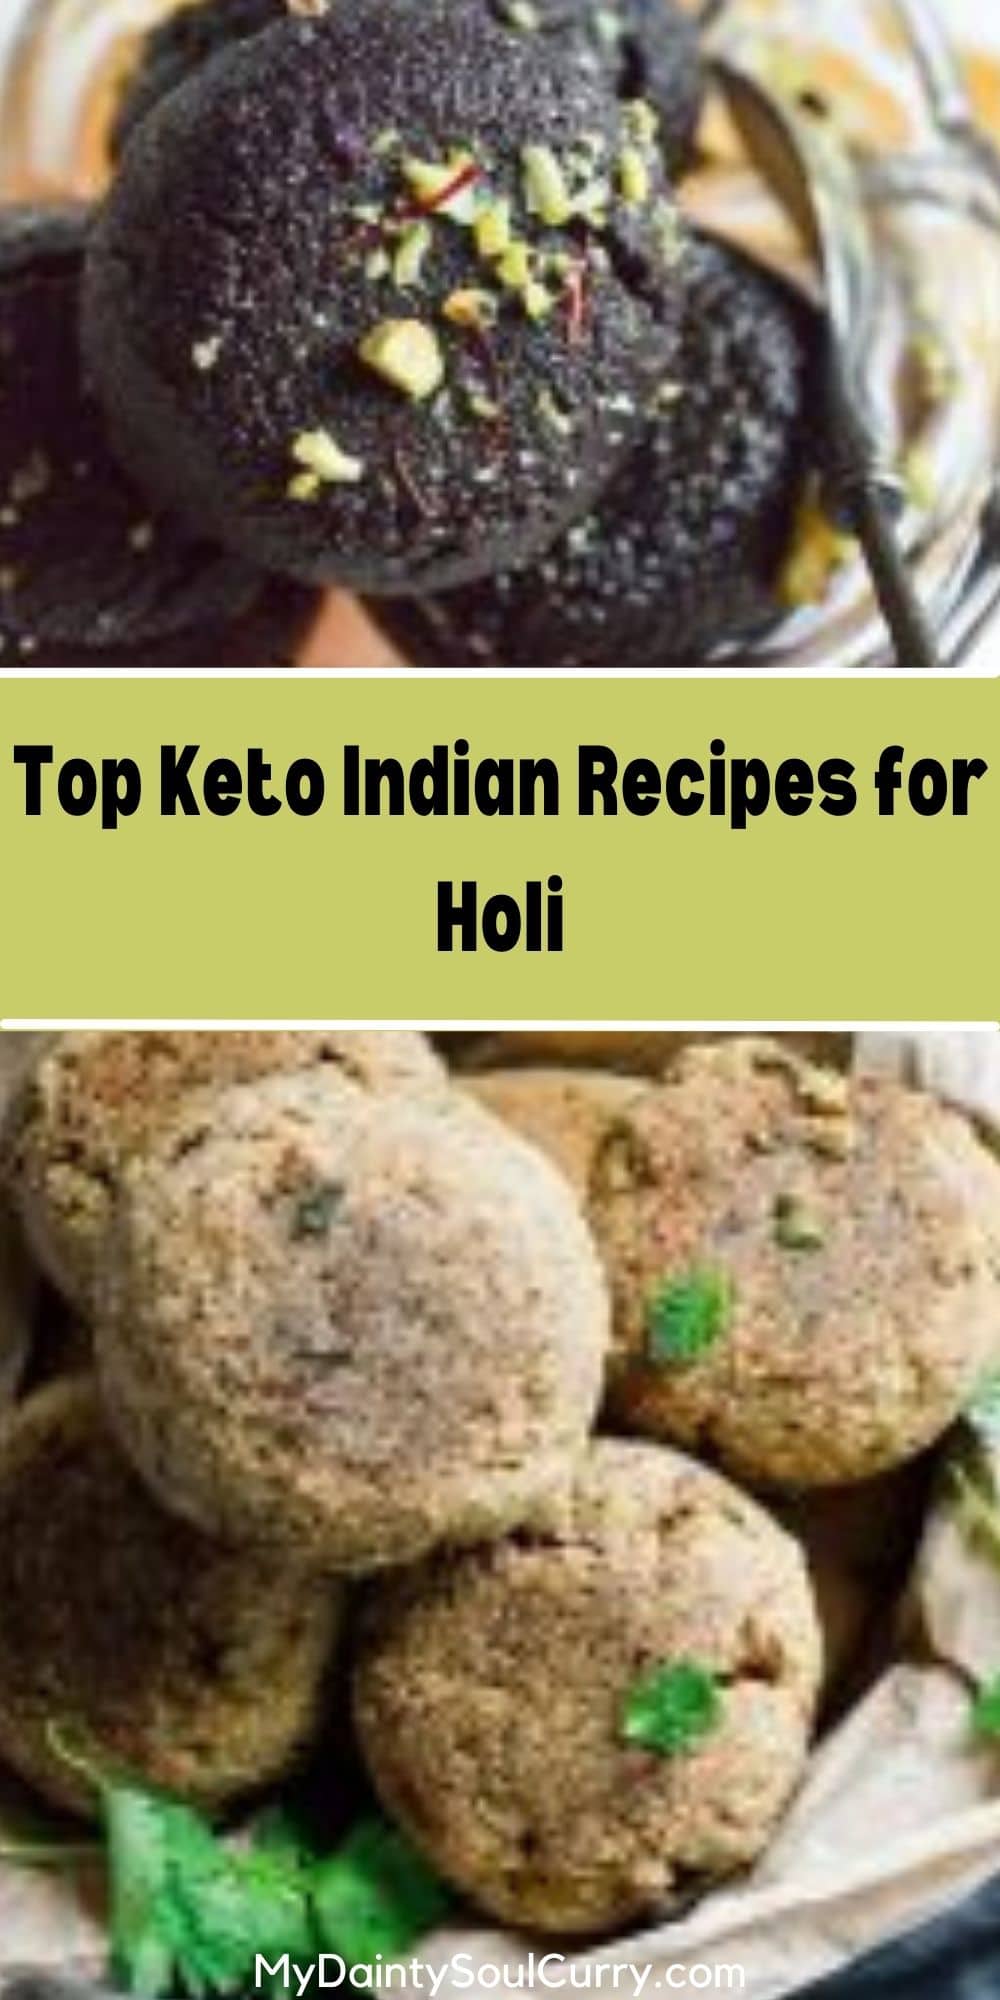 Top Keto Indian Recipes for Holi - My Dainty Soul Curry